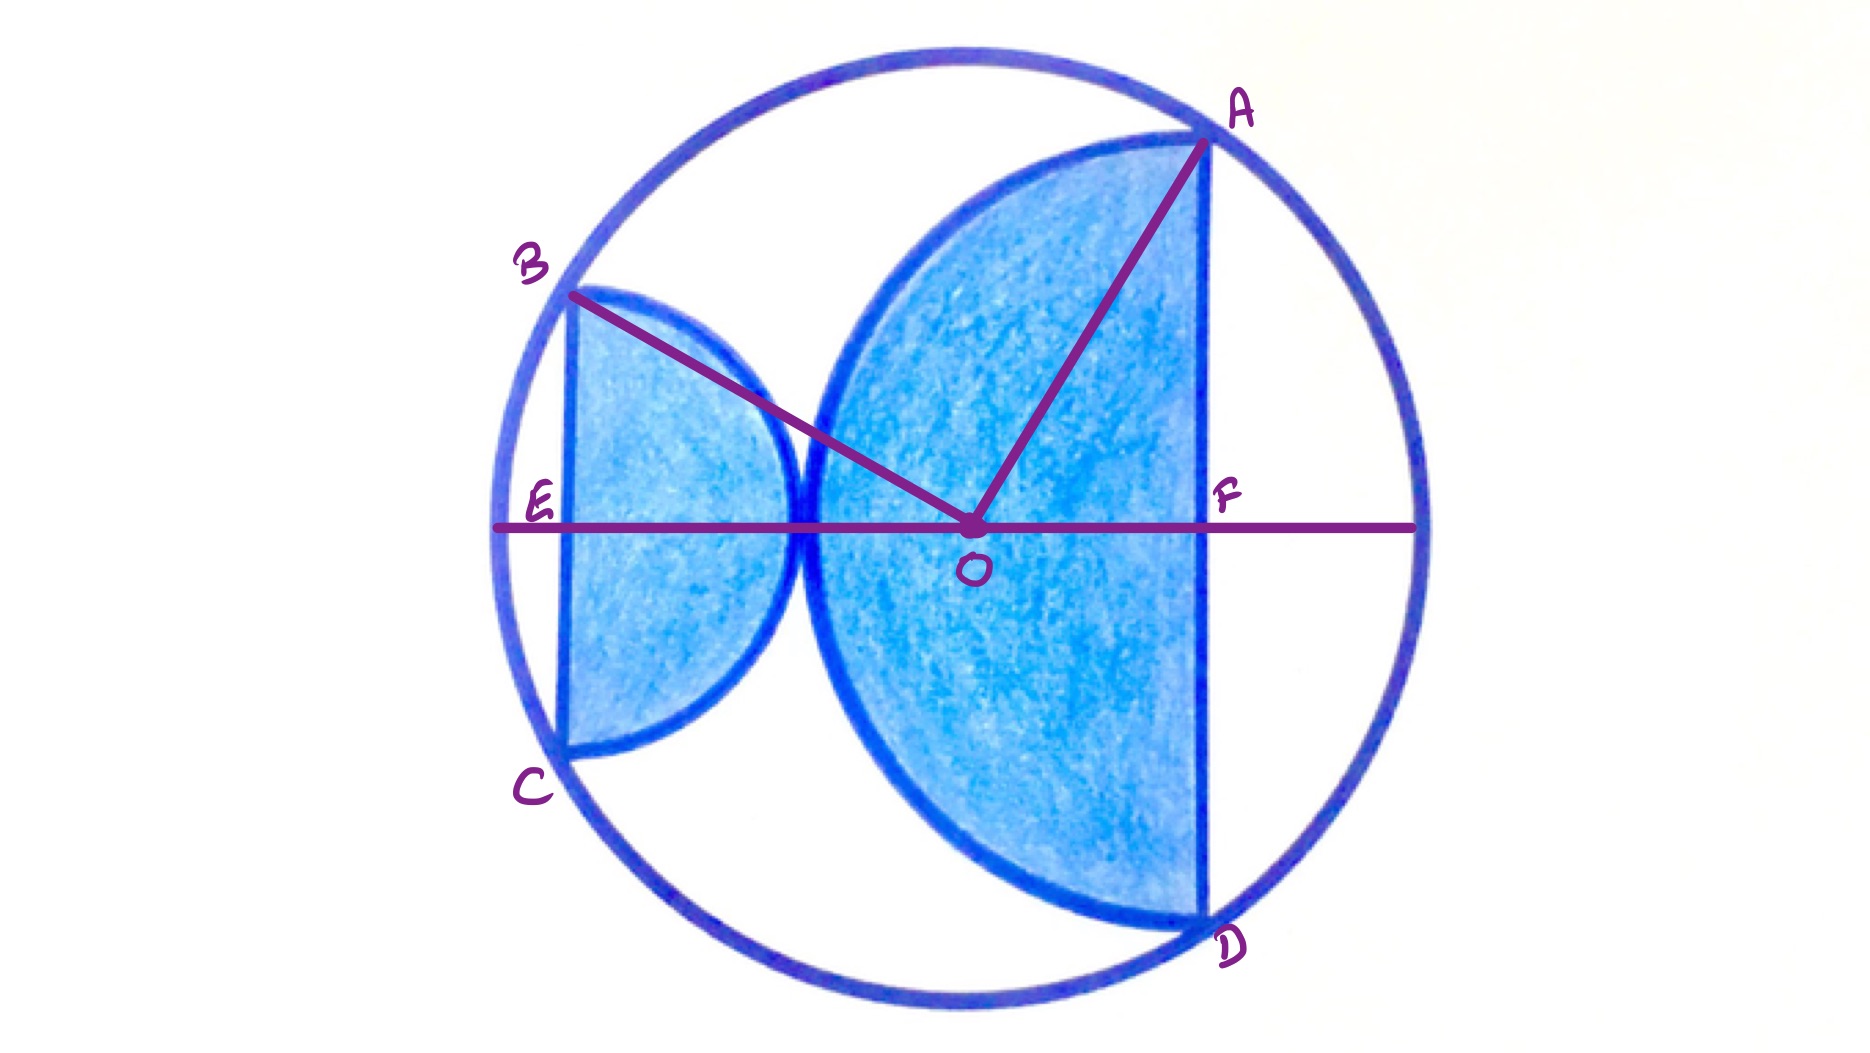 Two semi-circles in a circle congruent